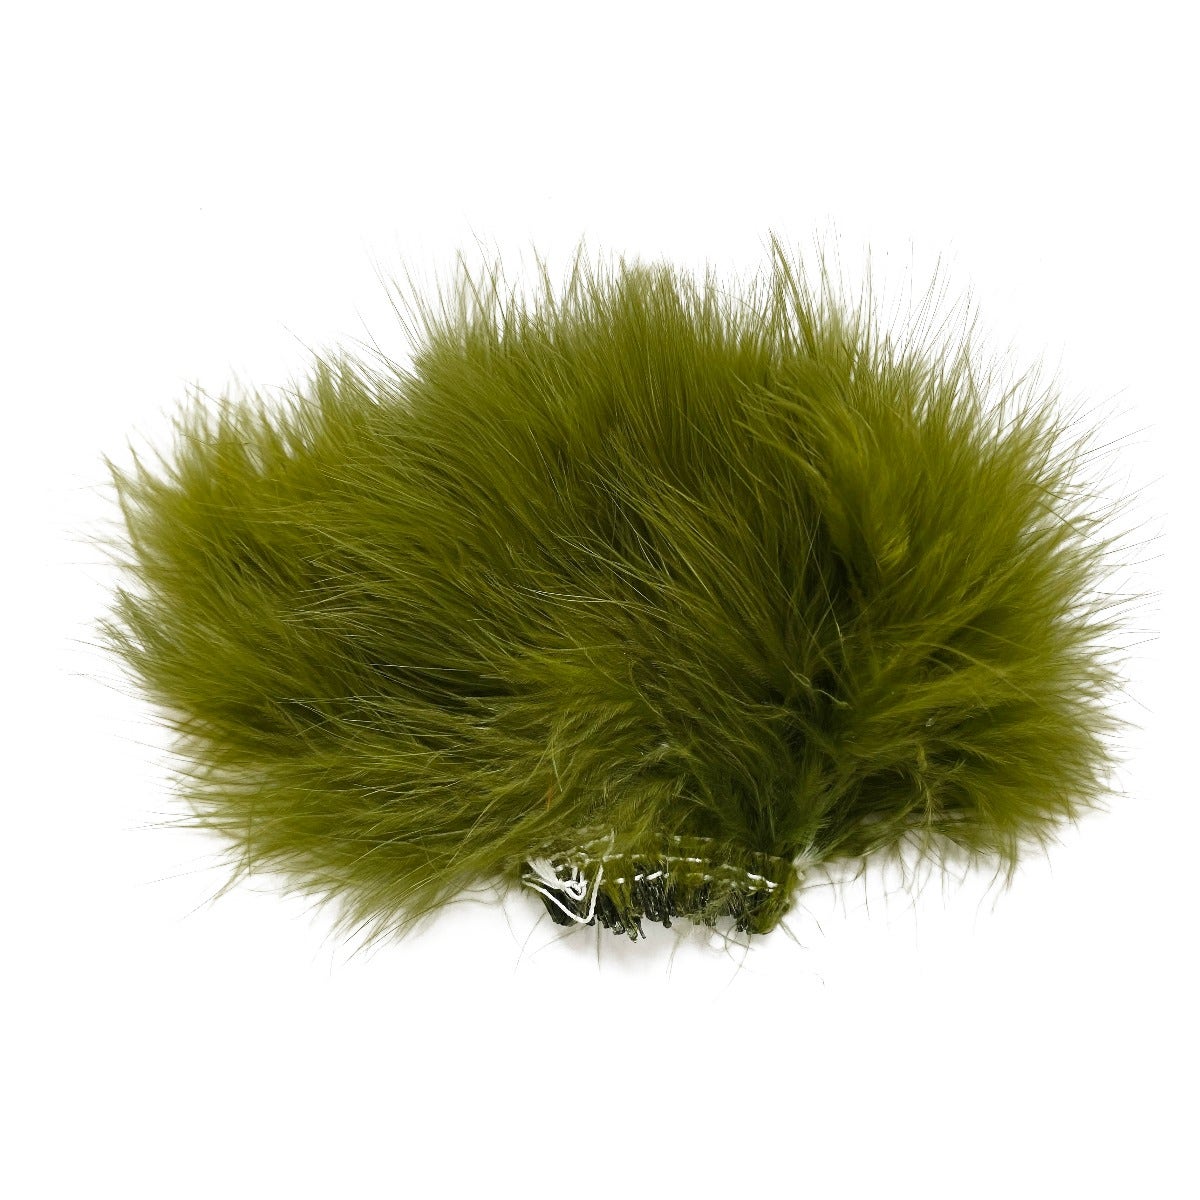 Strung Turkey Marabou Blood Quill Feathers 4-5" - OLIVE